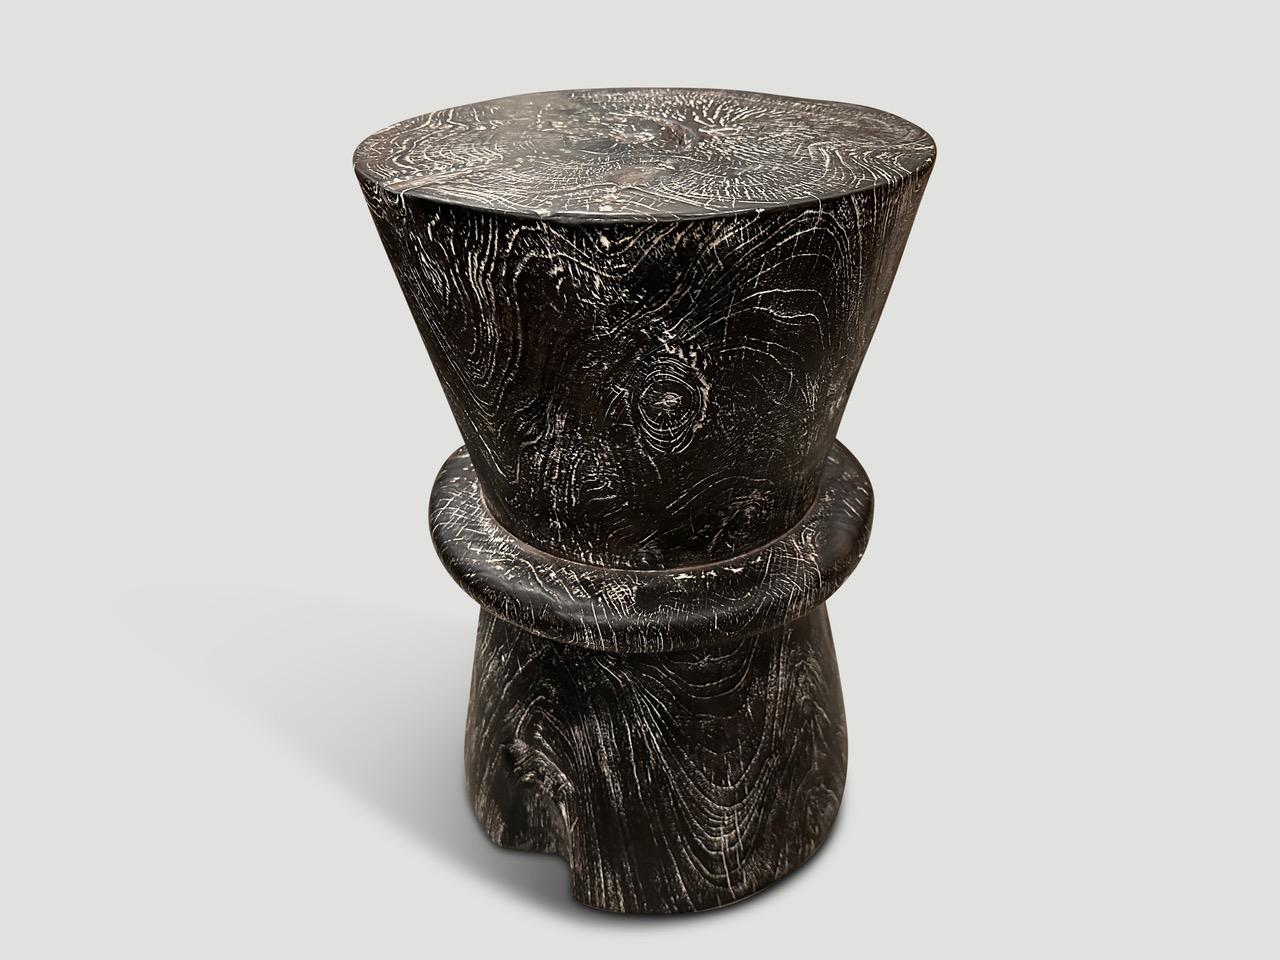 Contemporary Andrianna Shamaris Cerused Charred Teak Wood Side Table For Sale